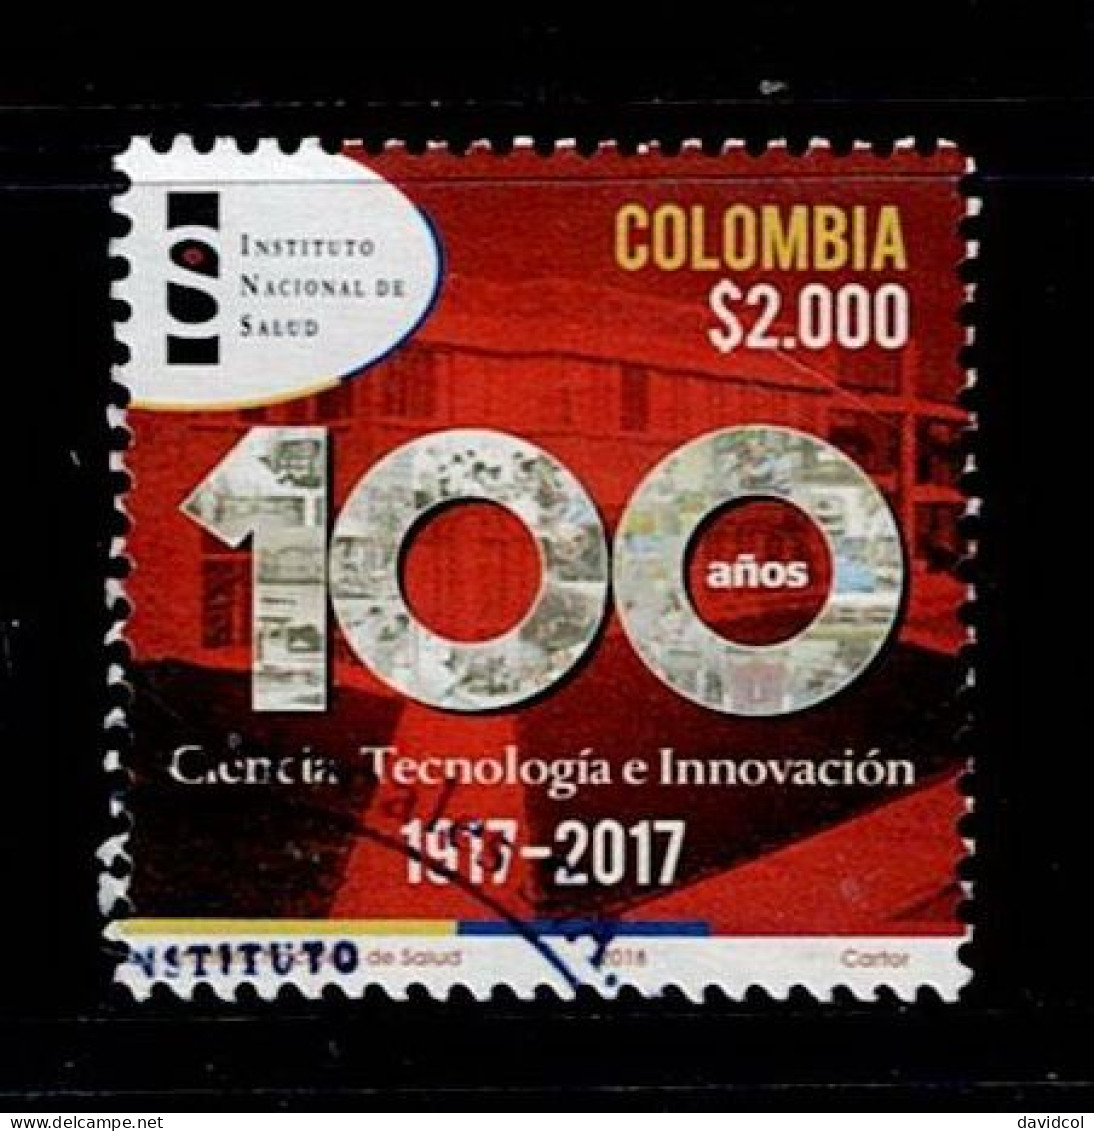 0066E-KOLUMBIEN - 2018 - USED - NATIONAL INSTITUTE OF HEALTH - Colombia